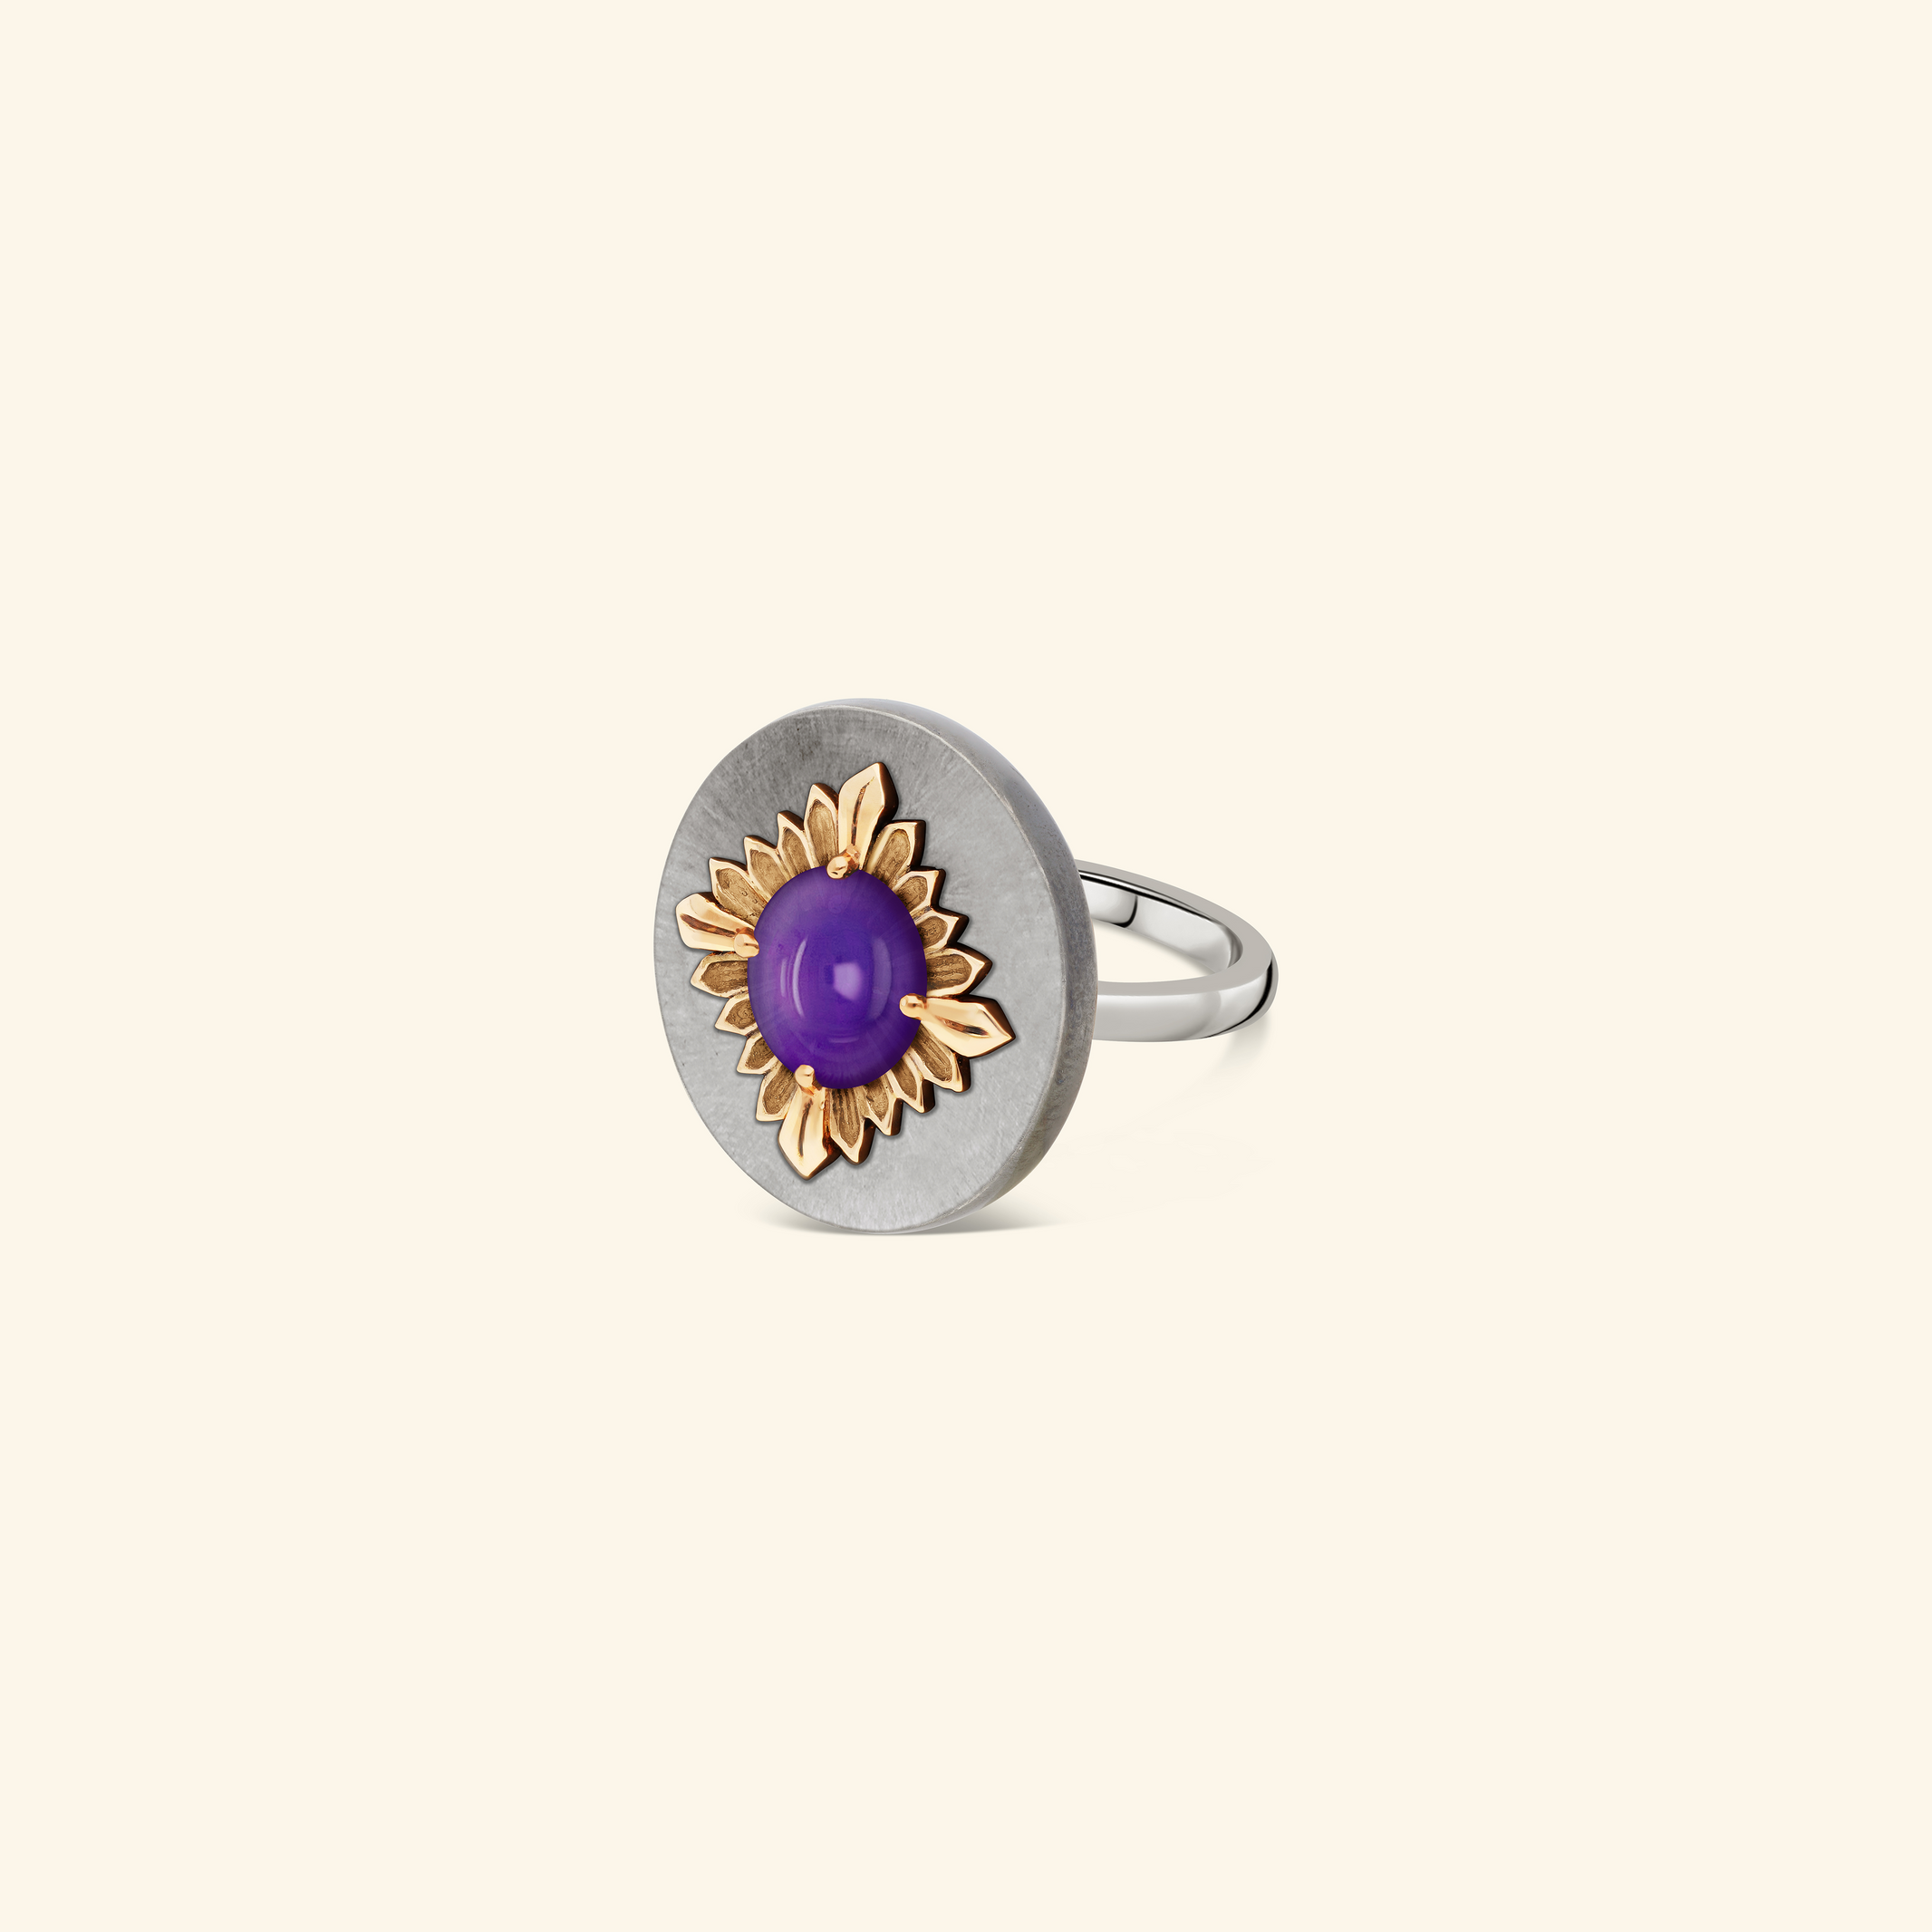 Jeton ring, silver jewelry and gold flower, set with an amethyst